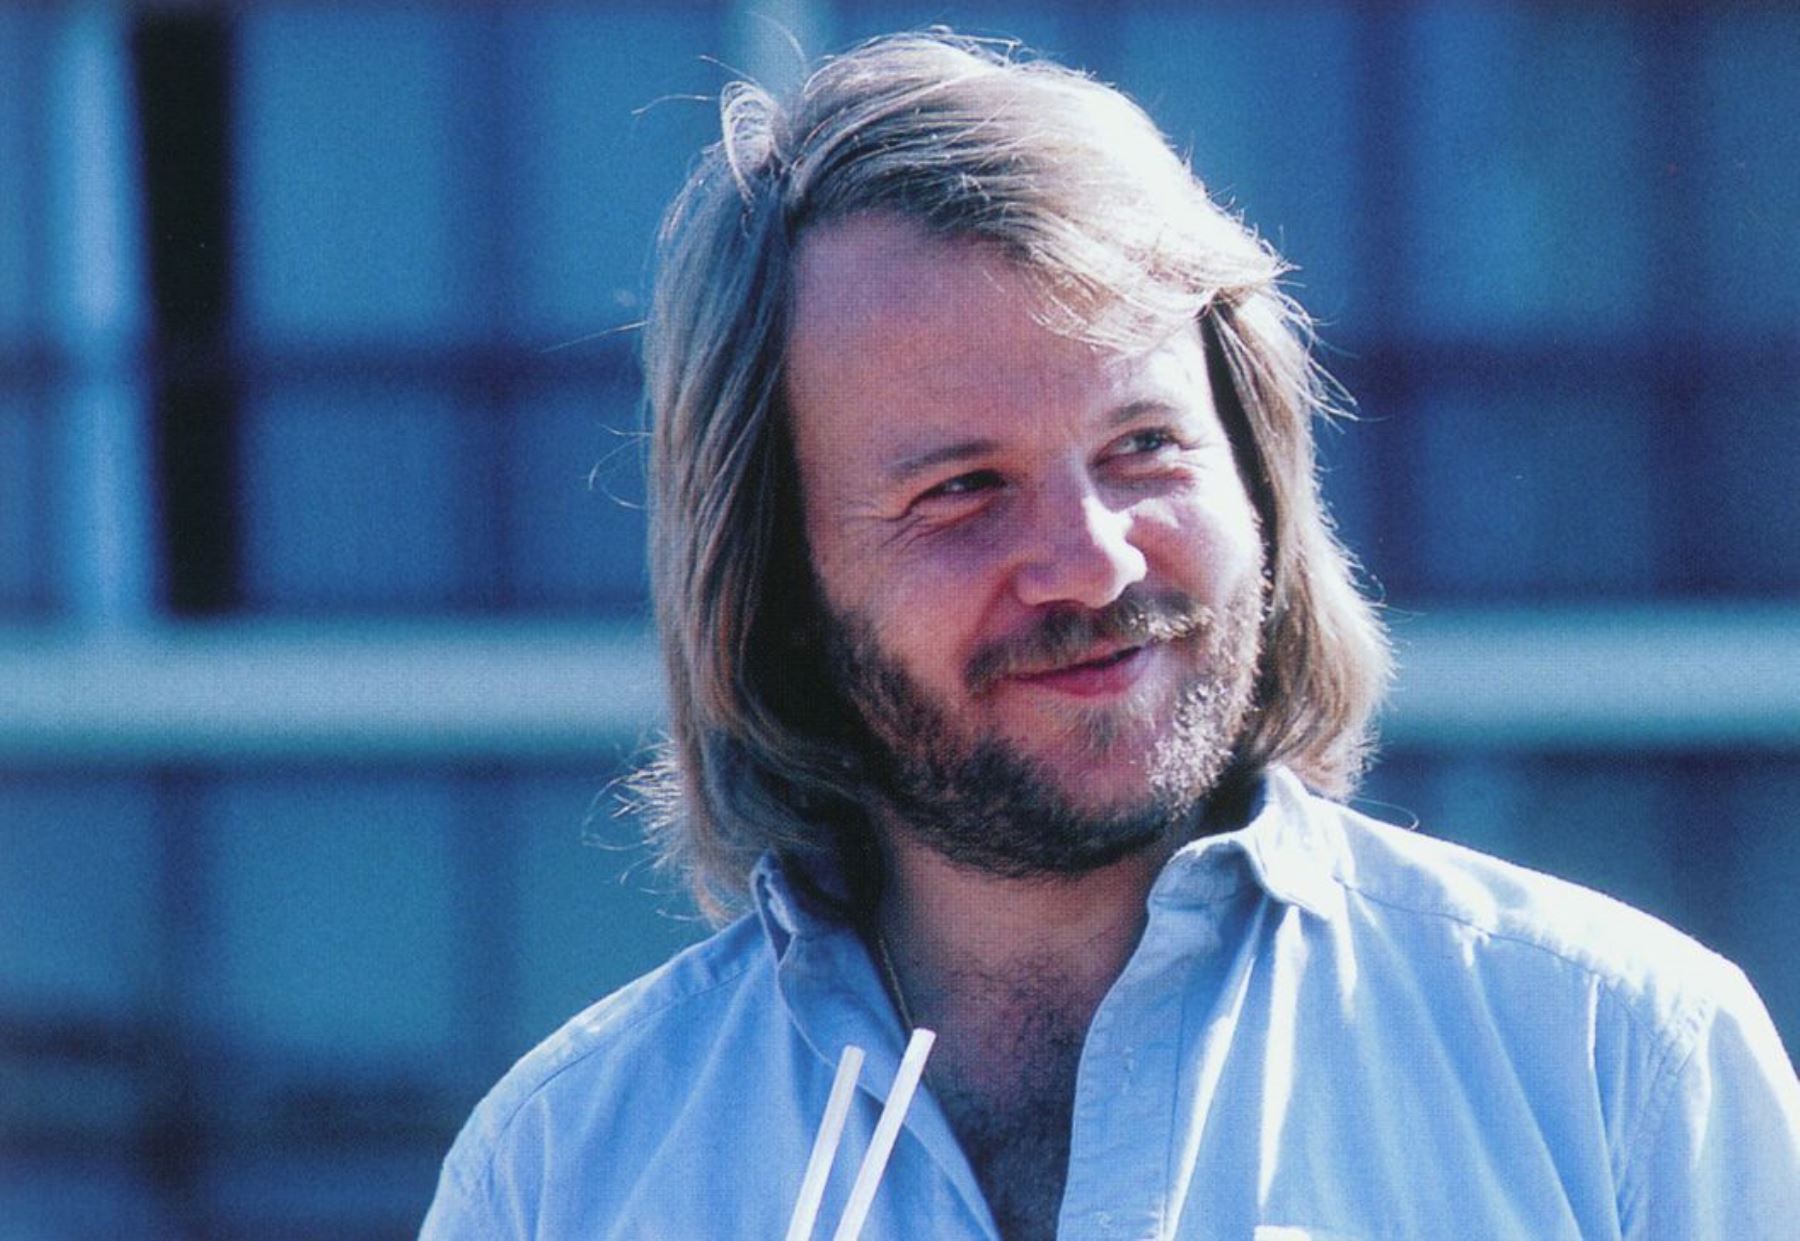 EFEMERIDE MUSICAL - Benny Andersson (Abba)